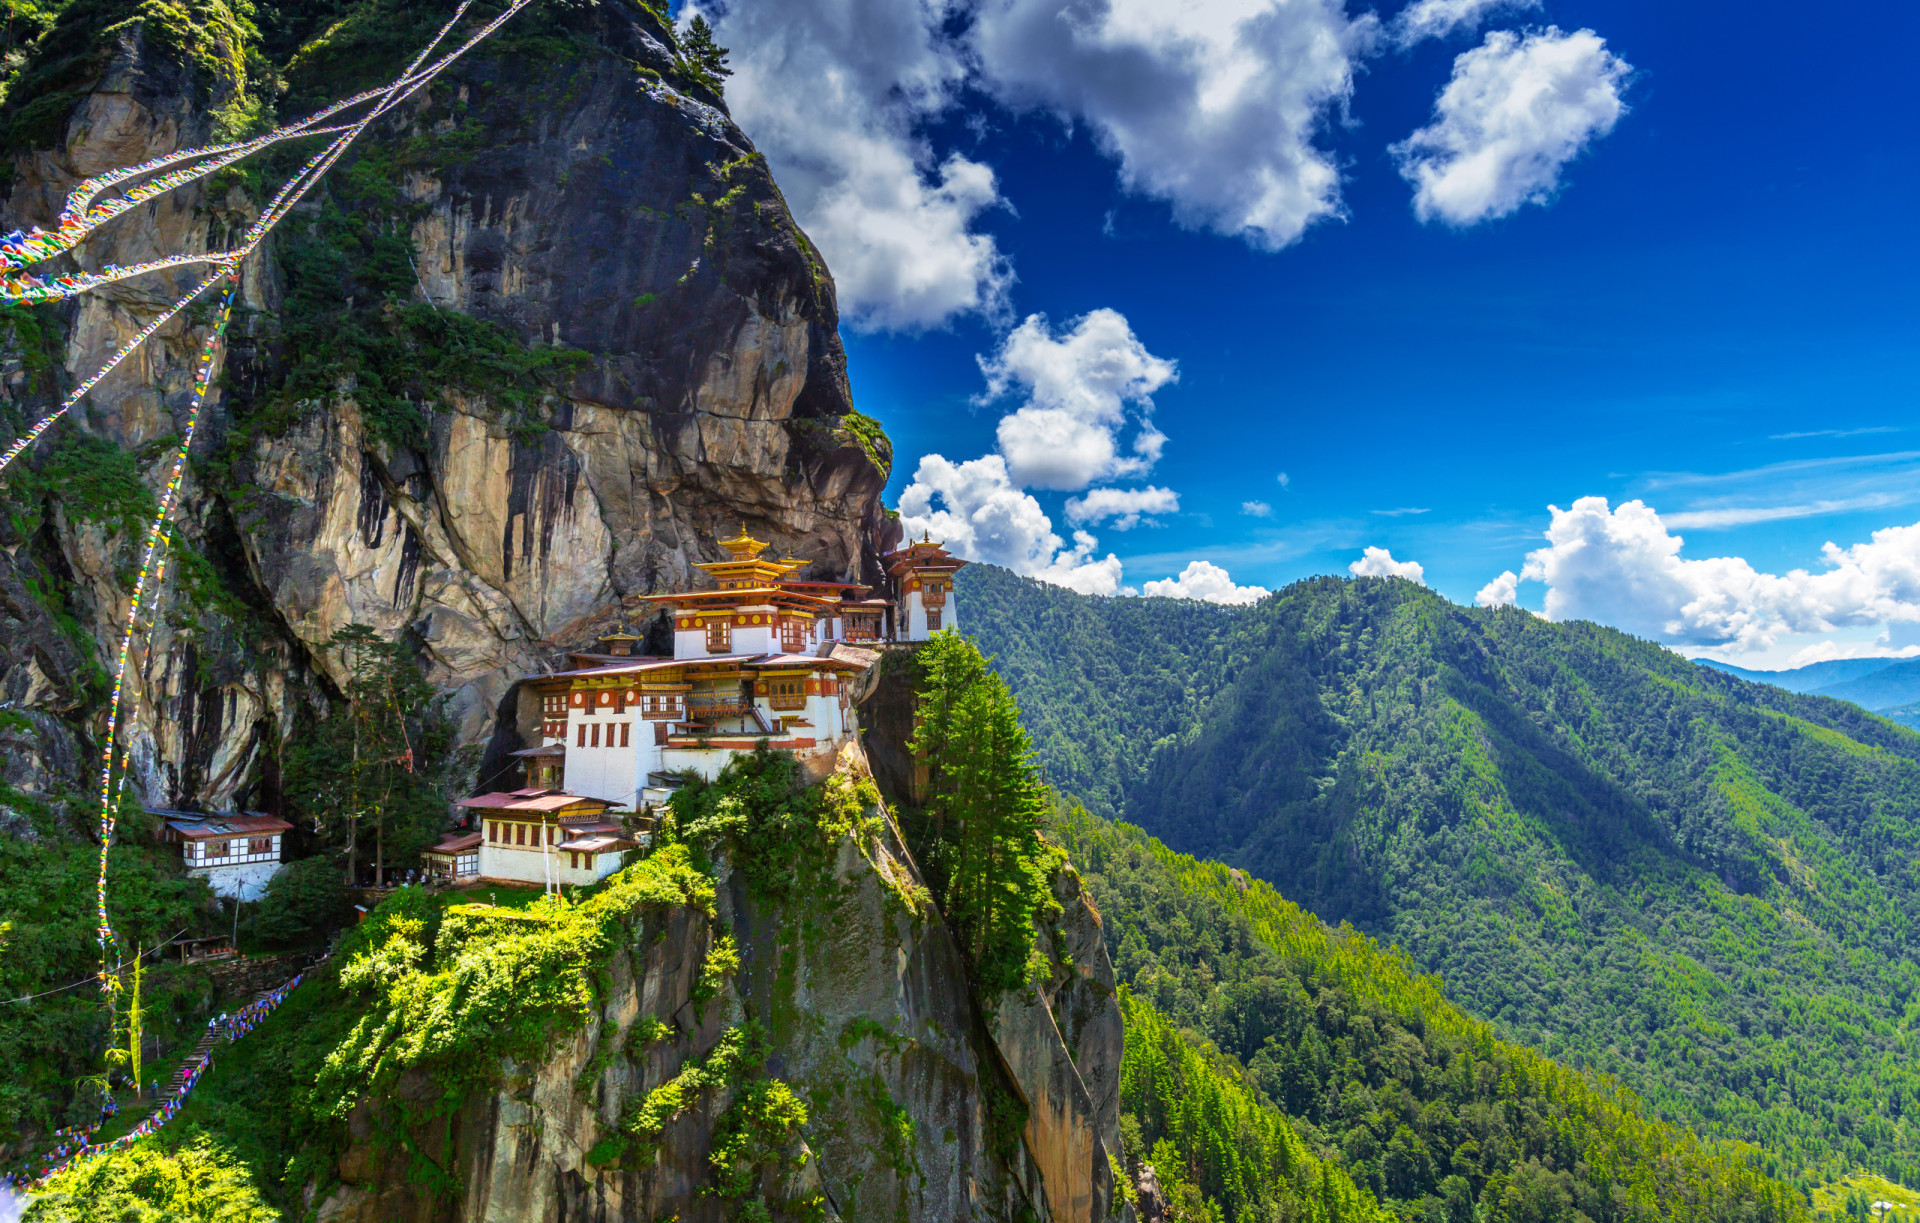 <p>Bhutan has long been known for its steep tourist taxes and charges. The current daily fee for the majority of visitors is US$100.</p><p><a href="https://www.msn.com/en-my/community/channel/vid-7xx8mnucu55yw63we9va2gwr7uihbxwc68fxqp25x6tg4ftibpra?cvid=94631541bc0f4f89bfd59158d696ad7e">Follow us and access great exclusive content every day</a></p>